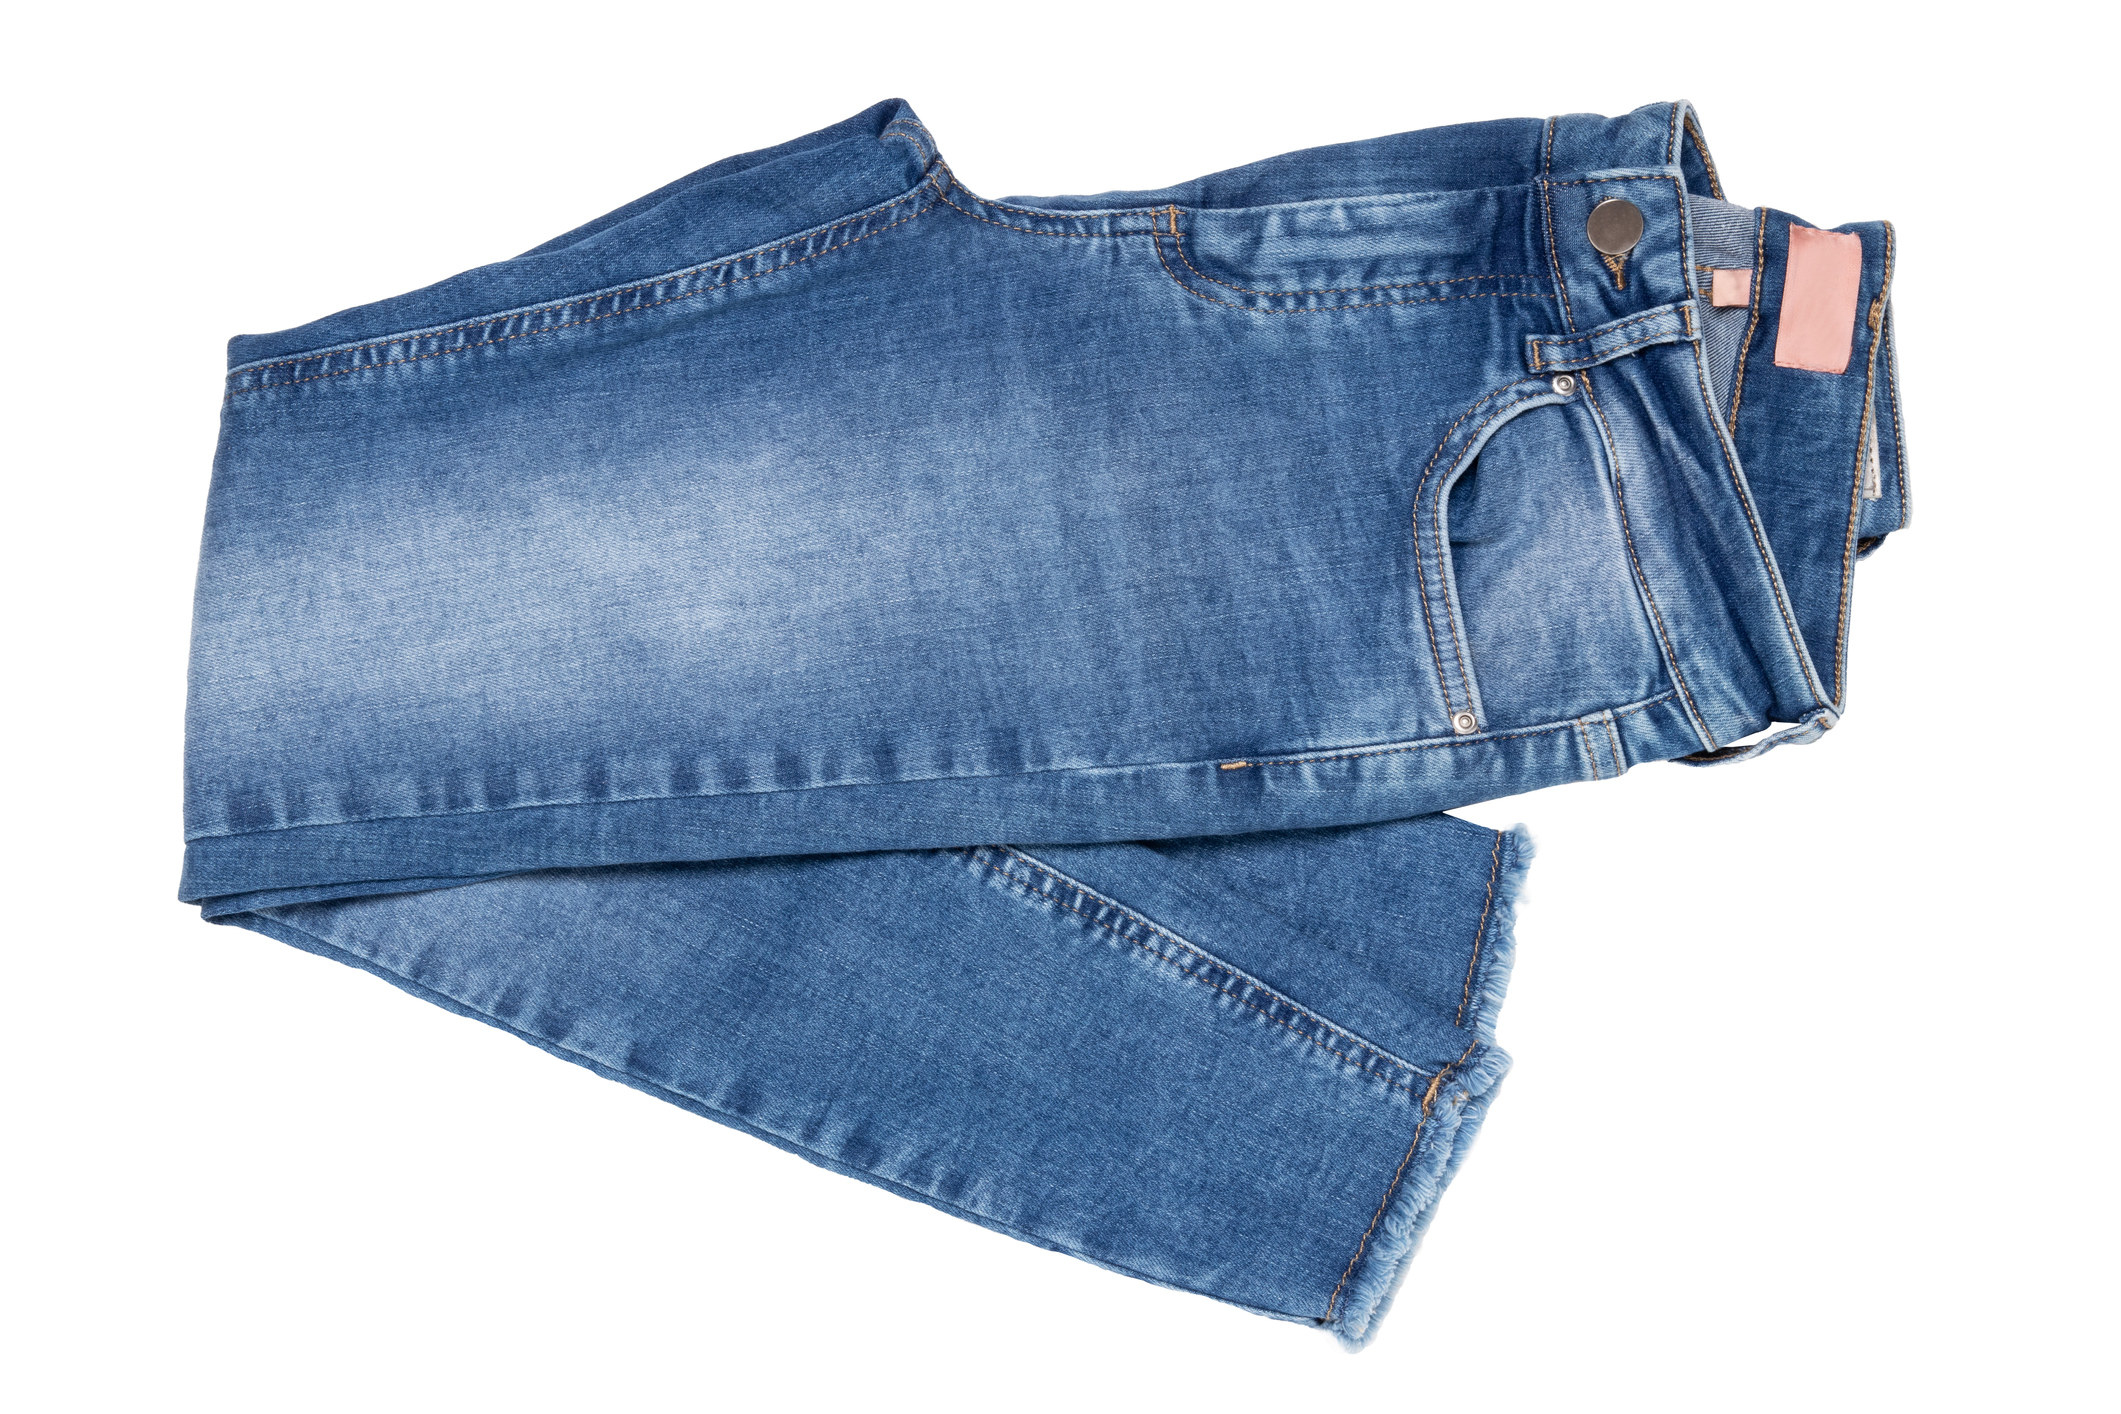 A pair of folded jeans